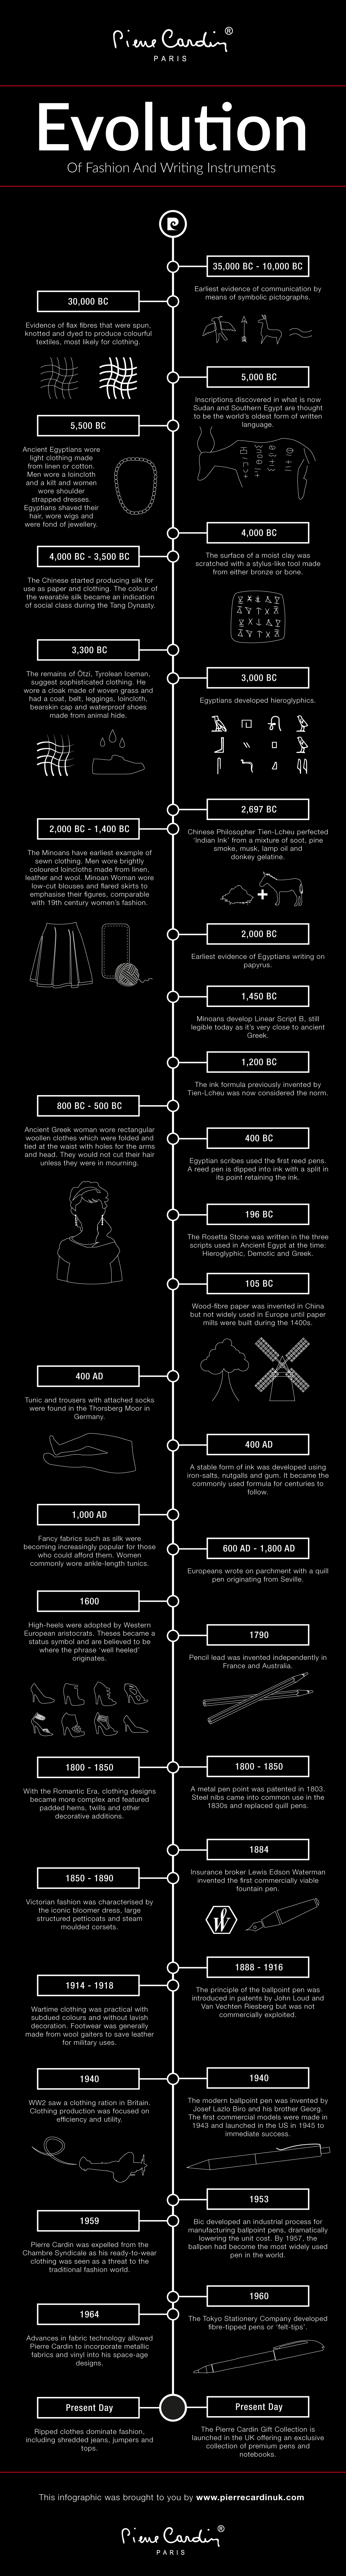 Timeline Infographic for Fashion vs Writing Instruments